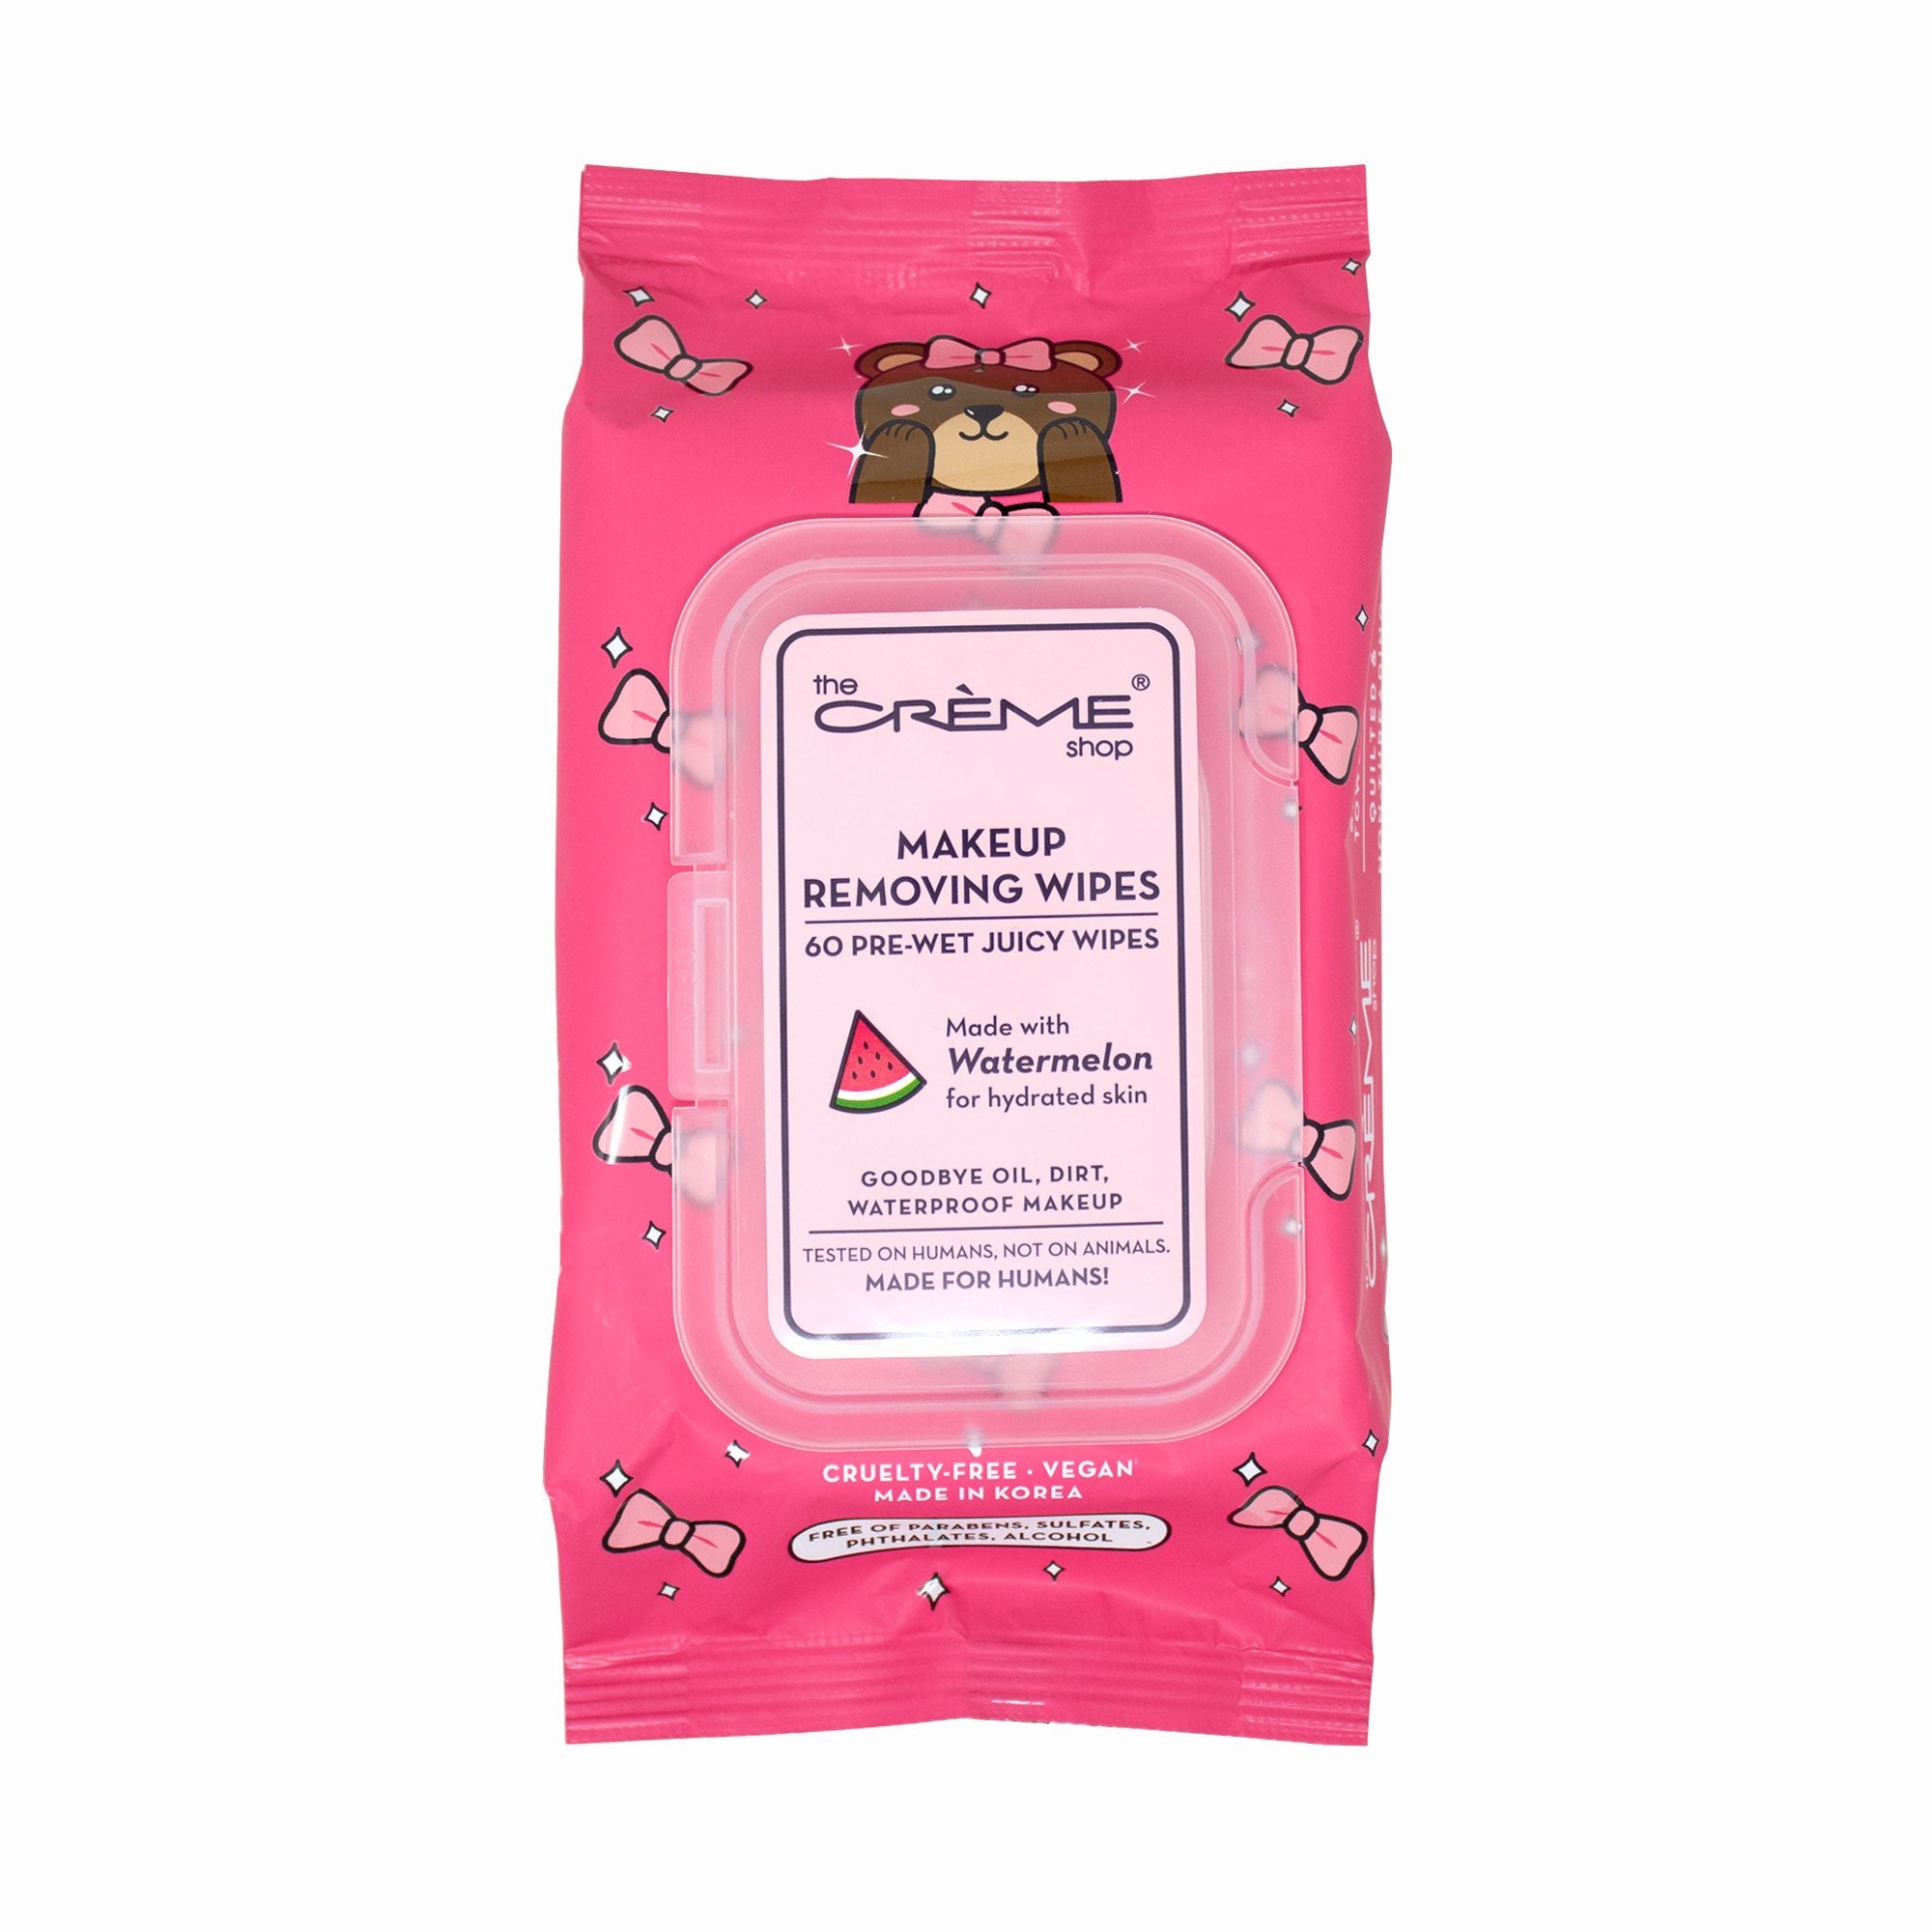 Juicy Makeup Removing Wipes | Hydrating Watermelon (Bear) Towelettes The Crème Shop 